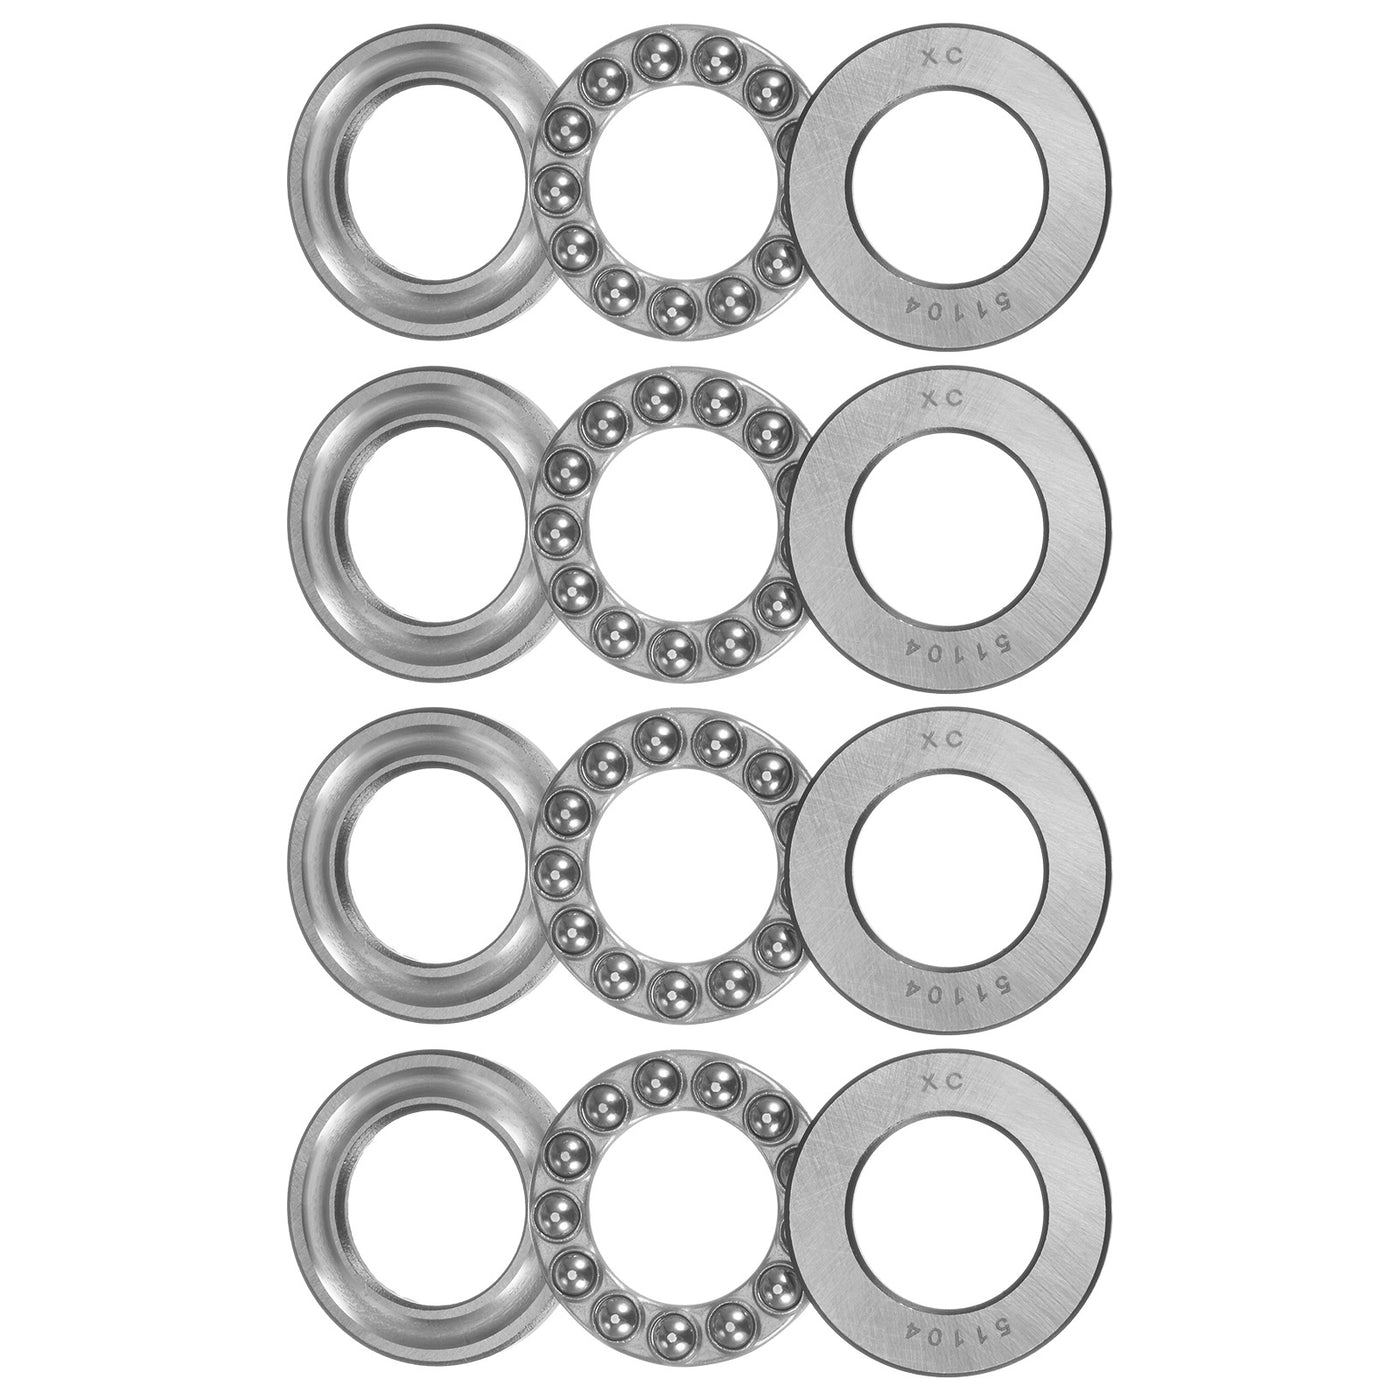 uxcell Uxcell 51104 Thrust Ball Bearing 20x35x10mm High Carbon Steel with Washers 4pcs